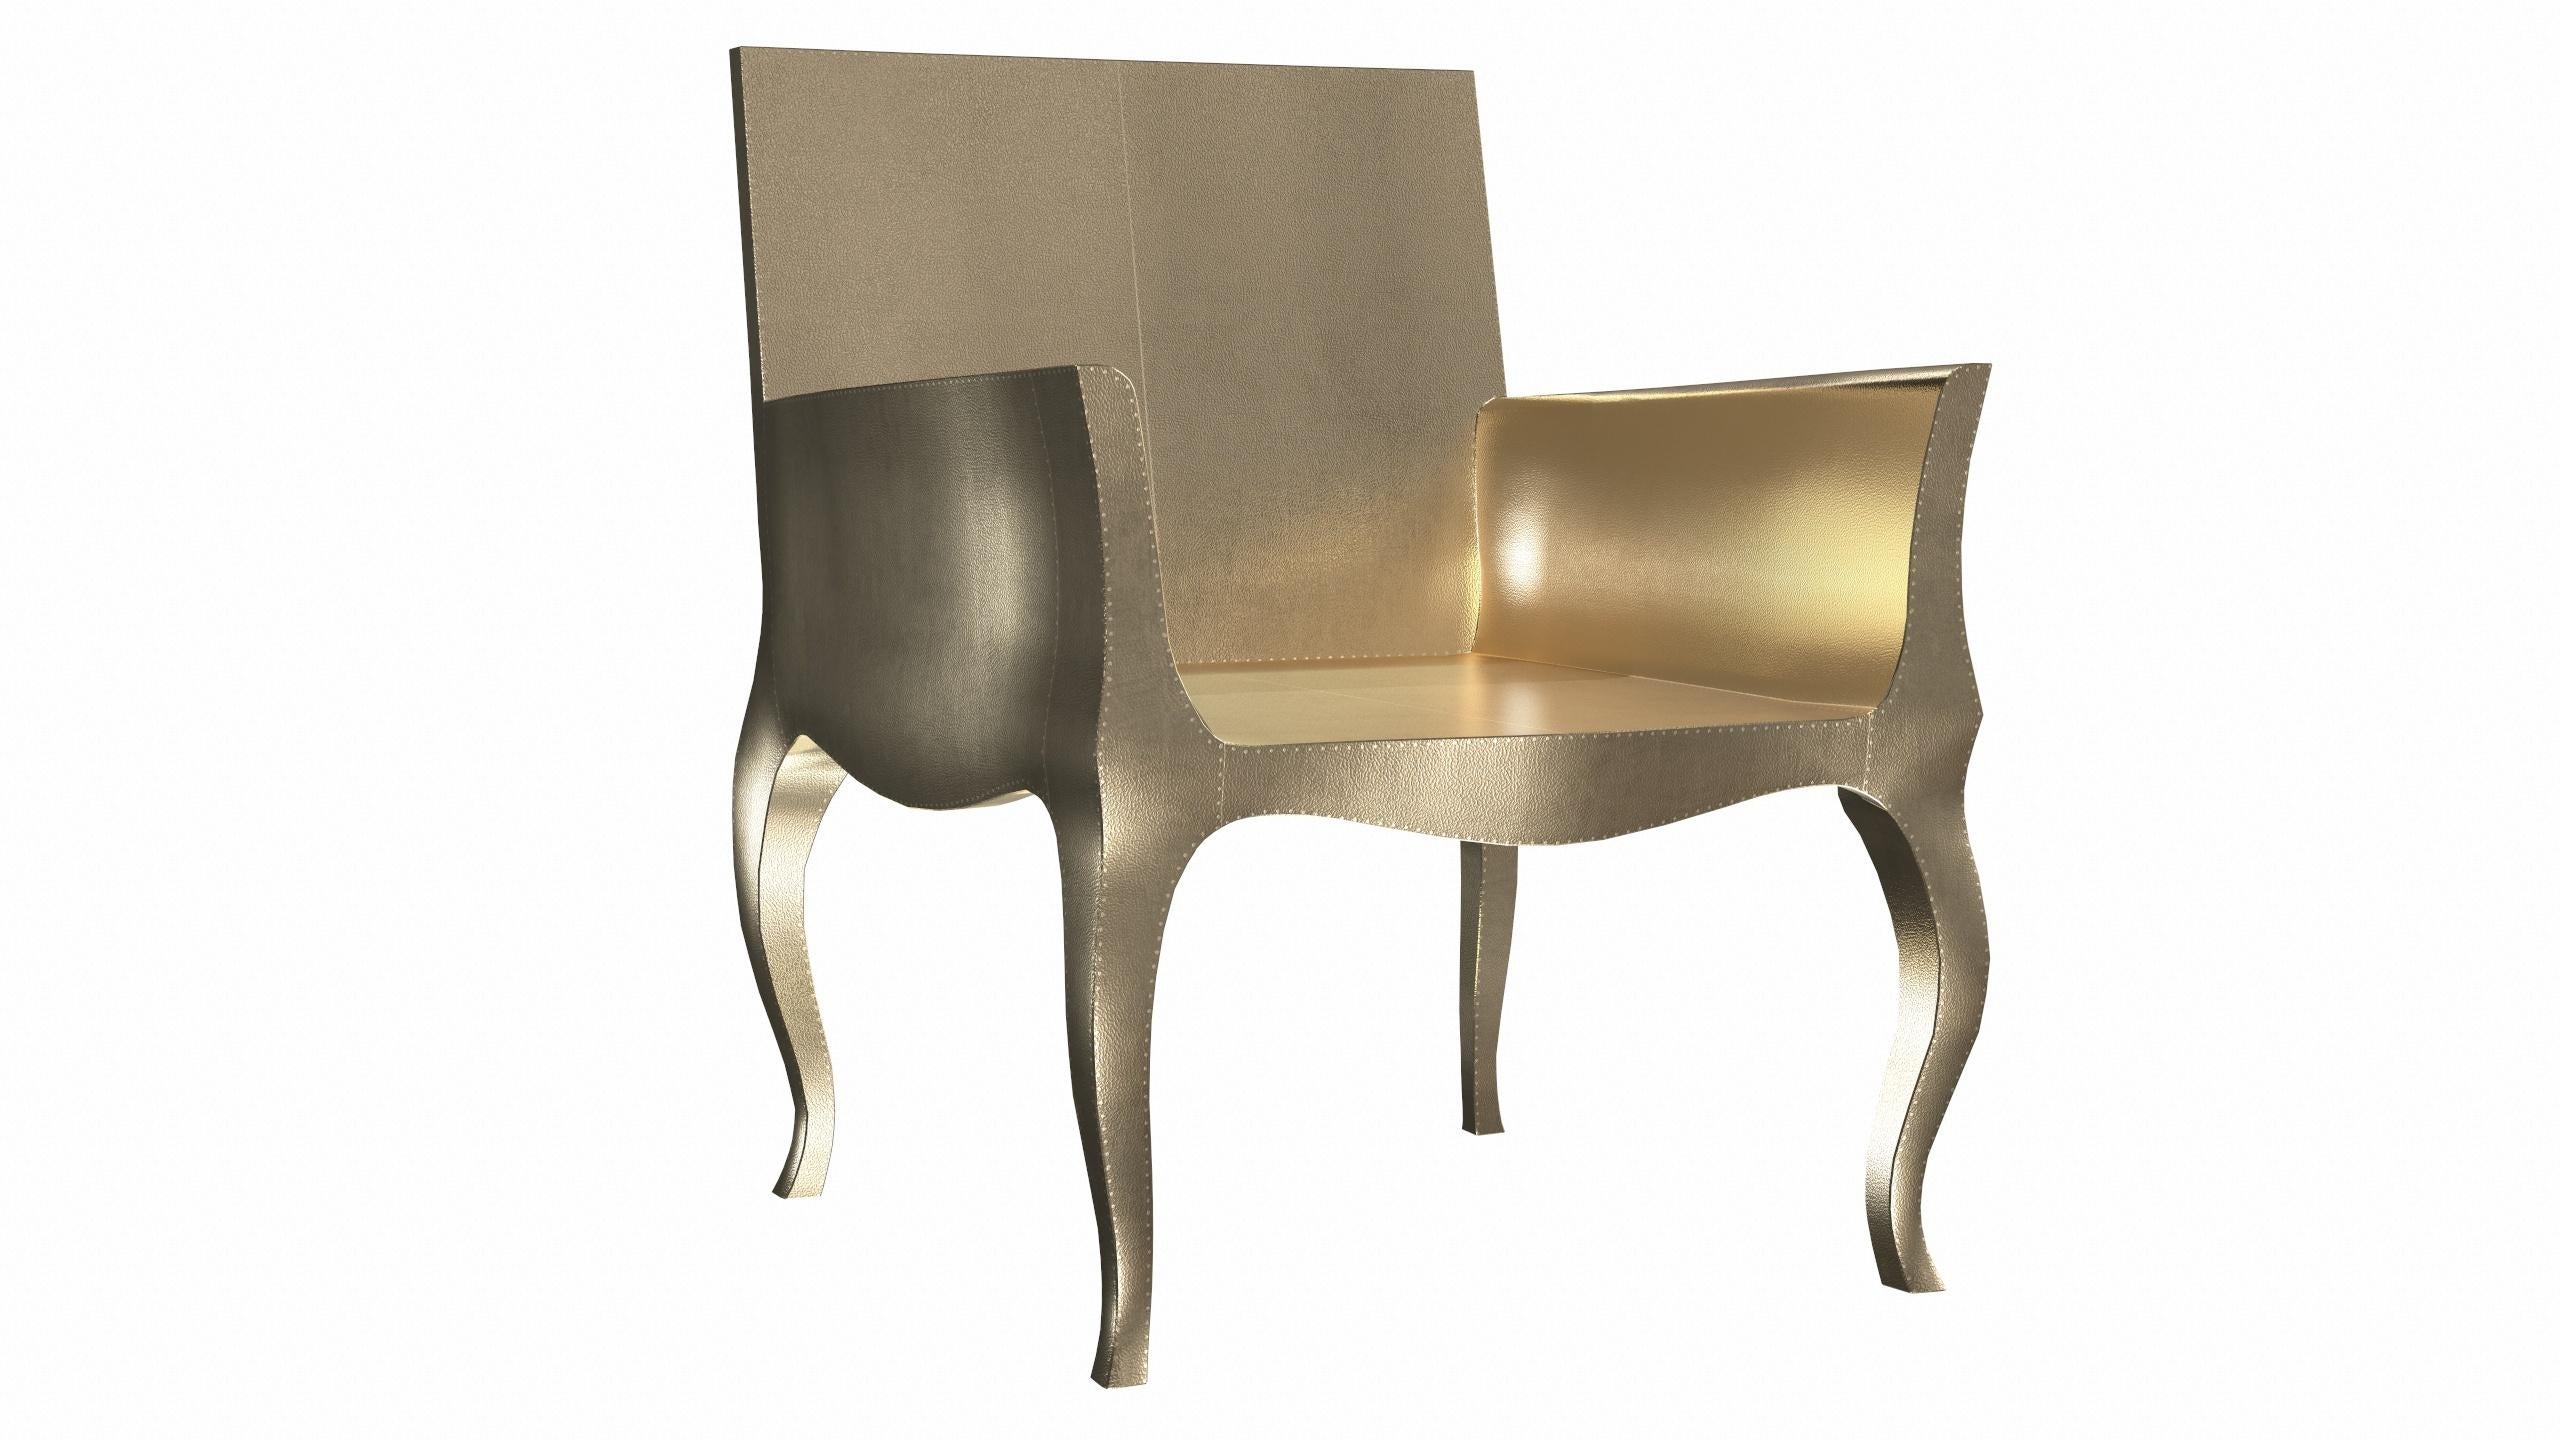 Hand-Carved Art Nouveau Chairs Fine Hammered in Brass by Paul Mathieu For Sale